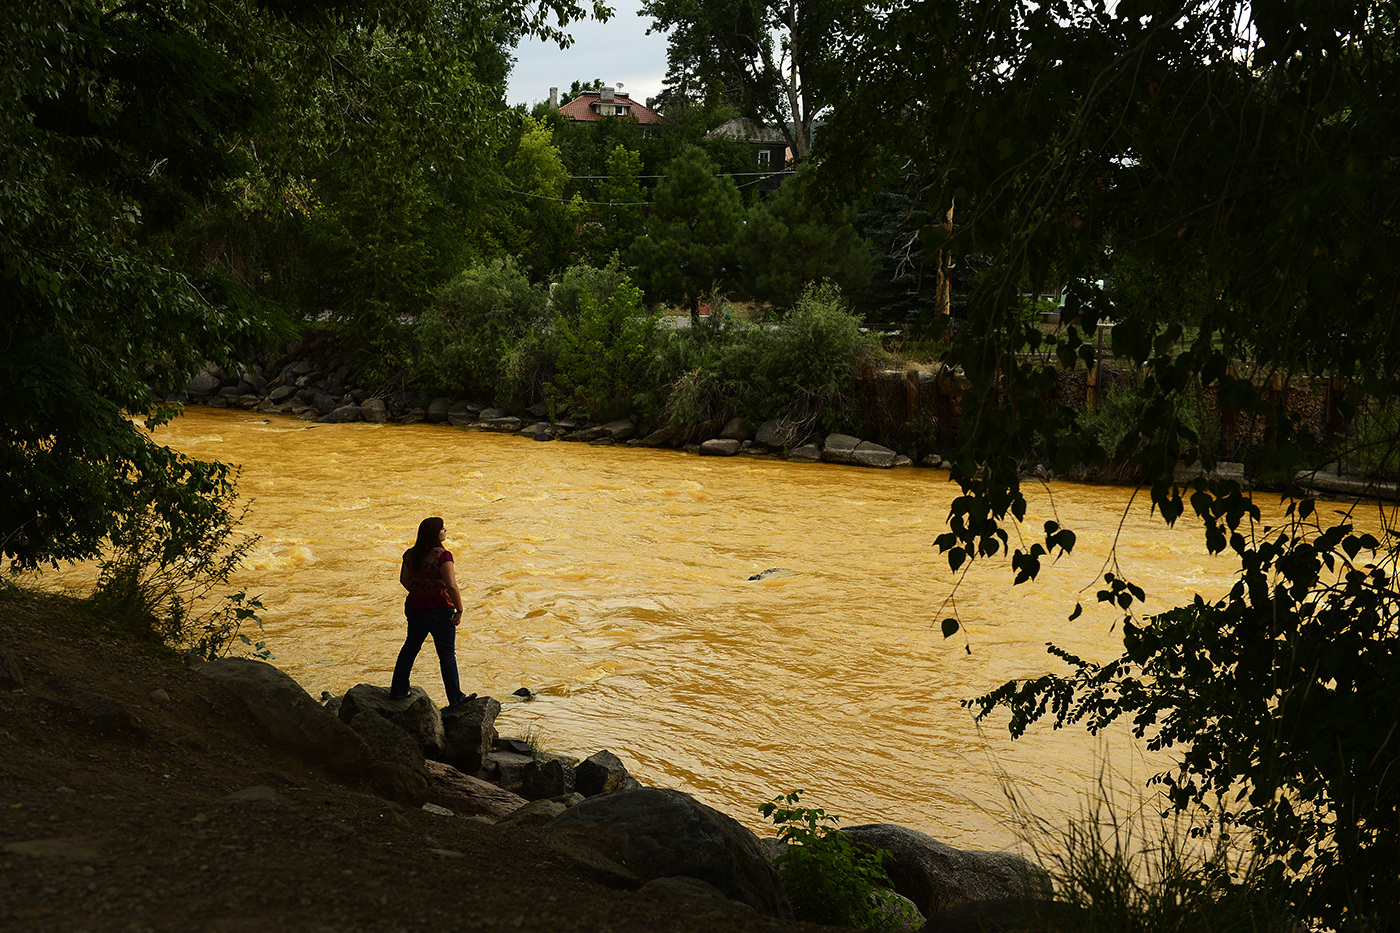 Kalyn Green, resident of Durango, stands on the edge of the river August 6, 2015 along Animas River.